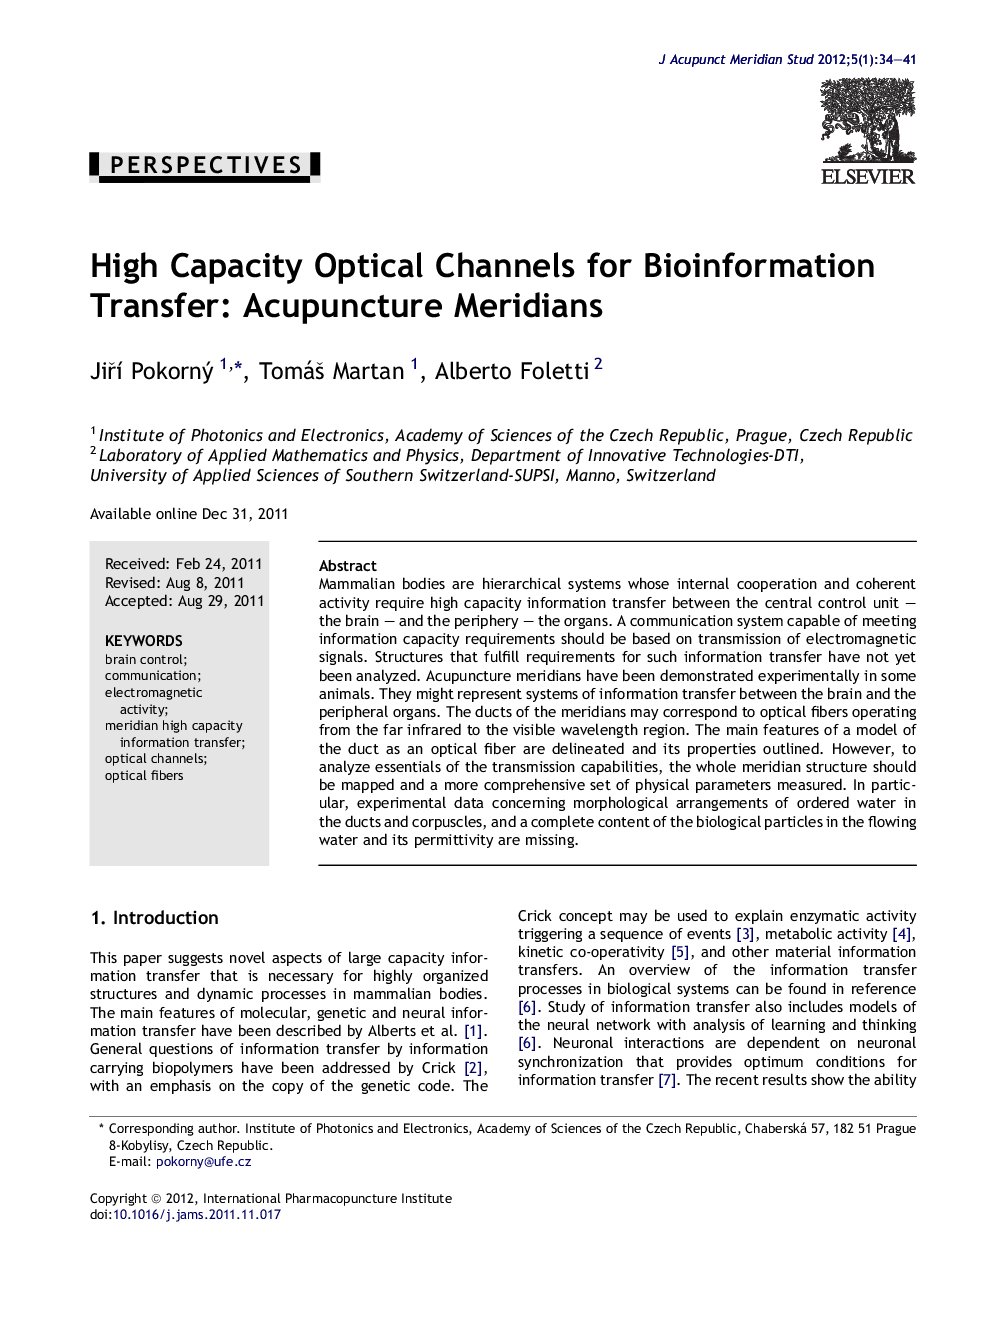 High Capacity Optical Channels for Bioinformation Transfer: Acupuncture Meridians